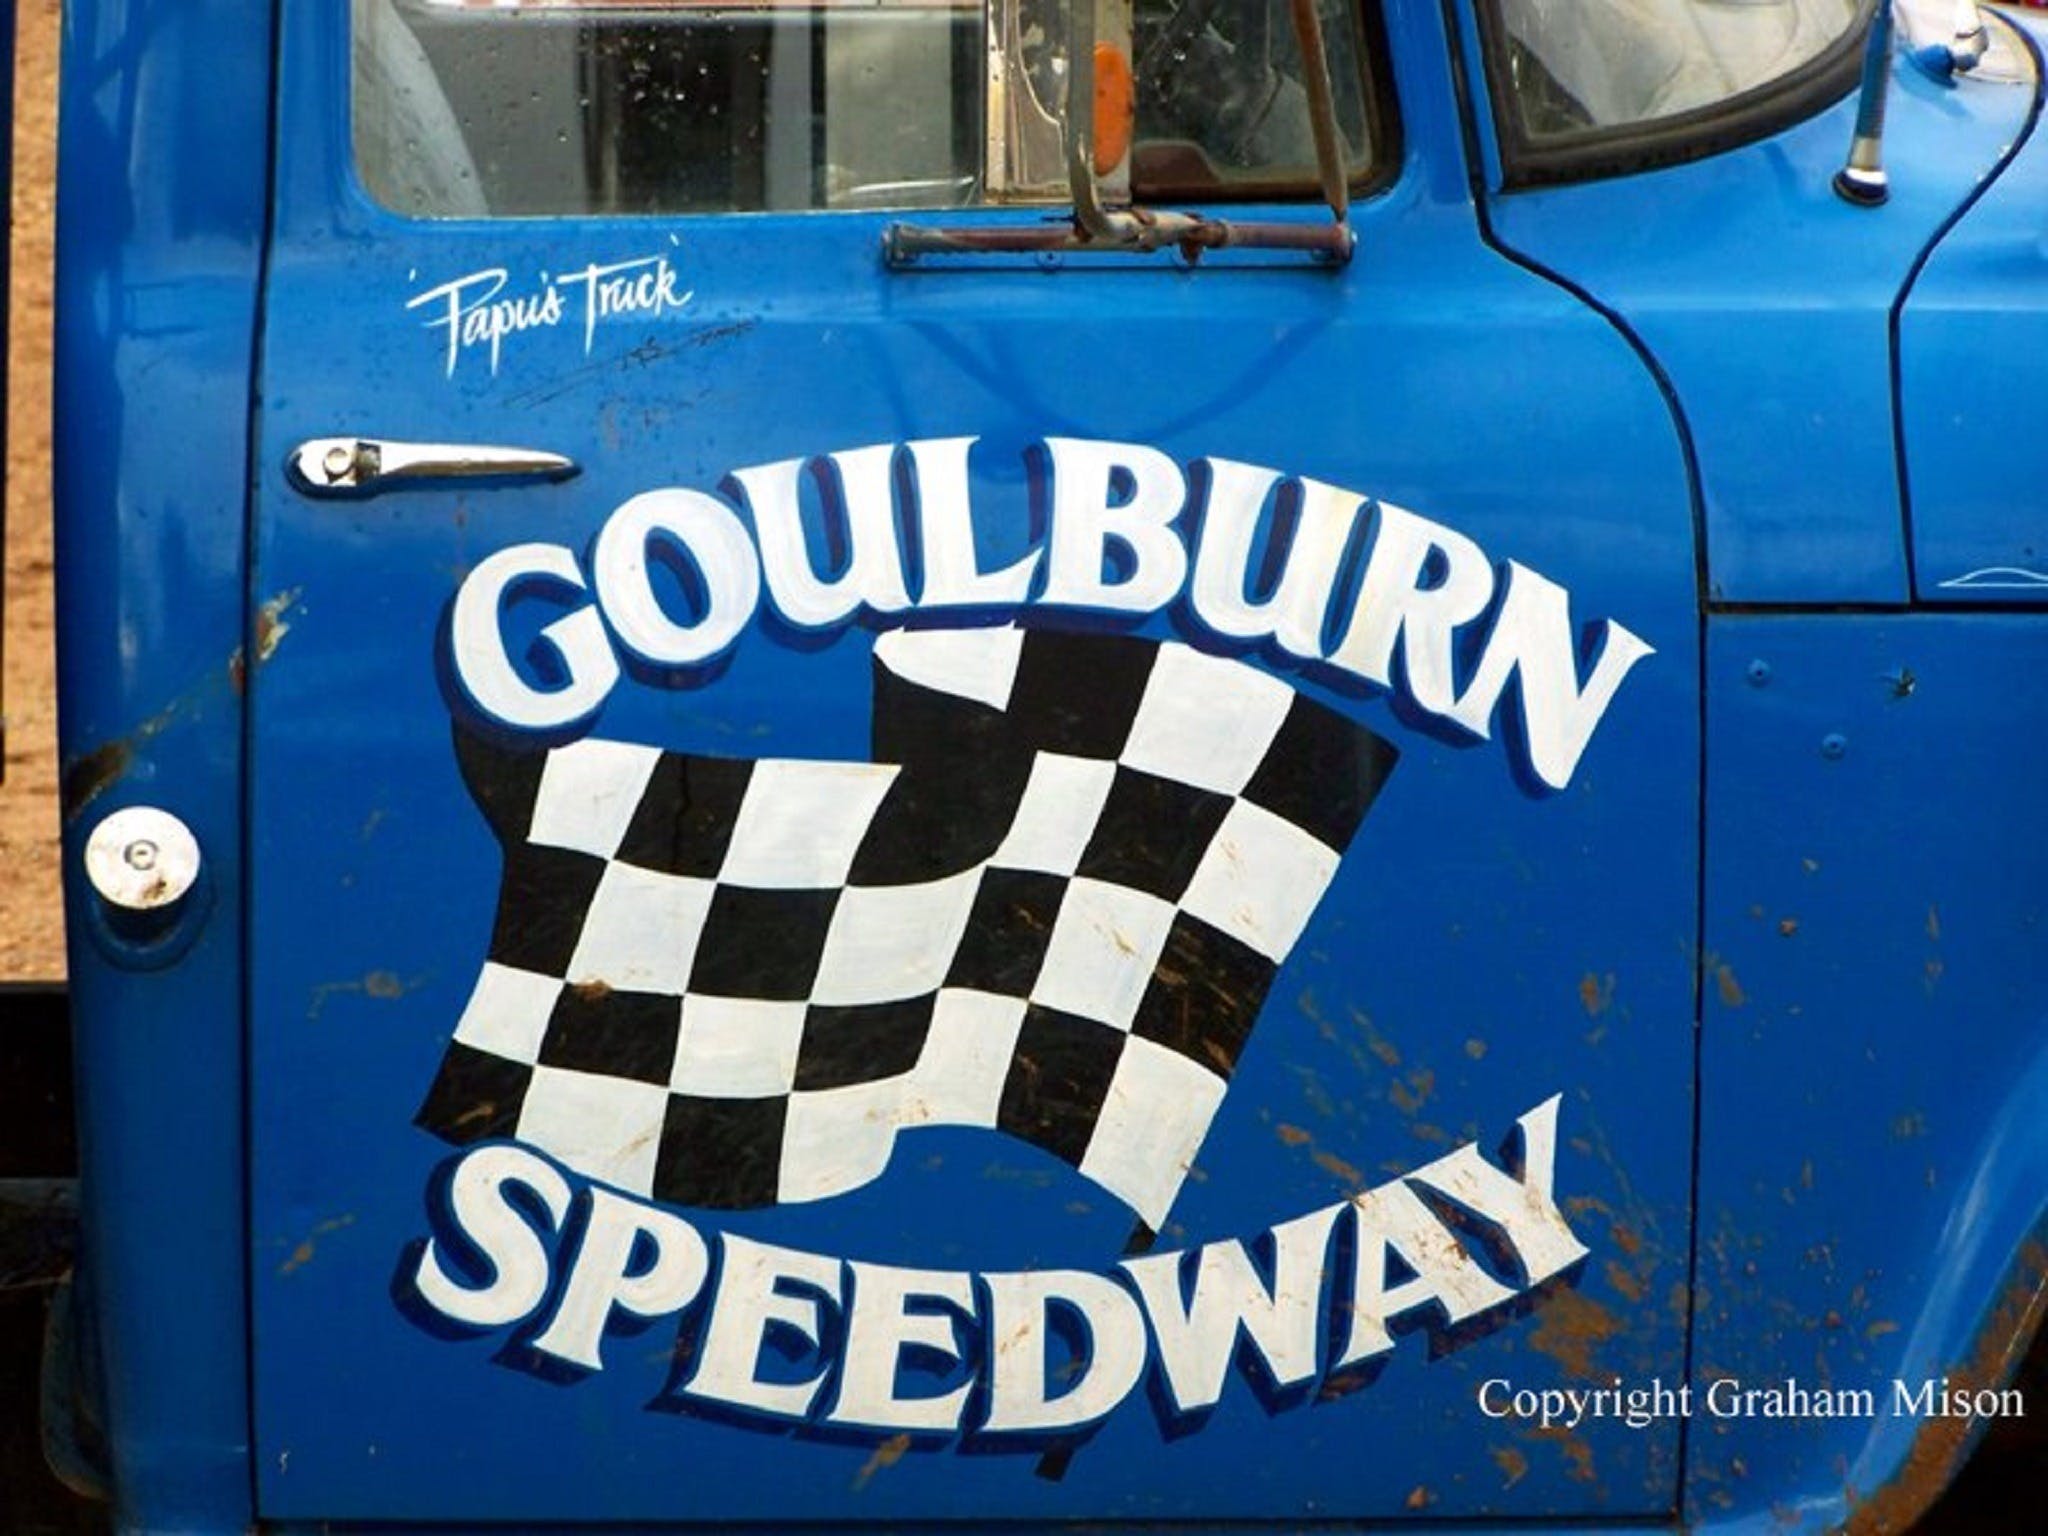 50 years of racing at Goulburn Speedway - Accommodation NT